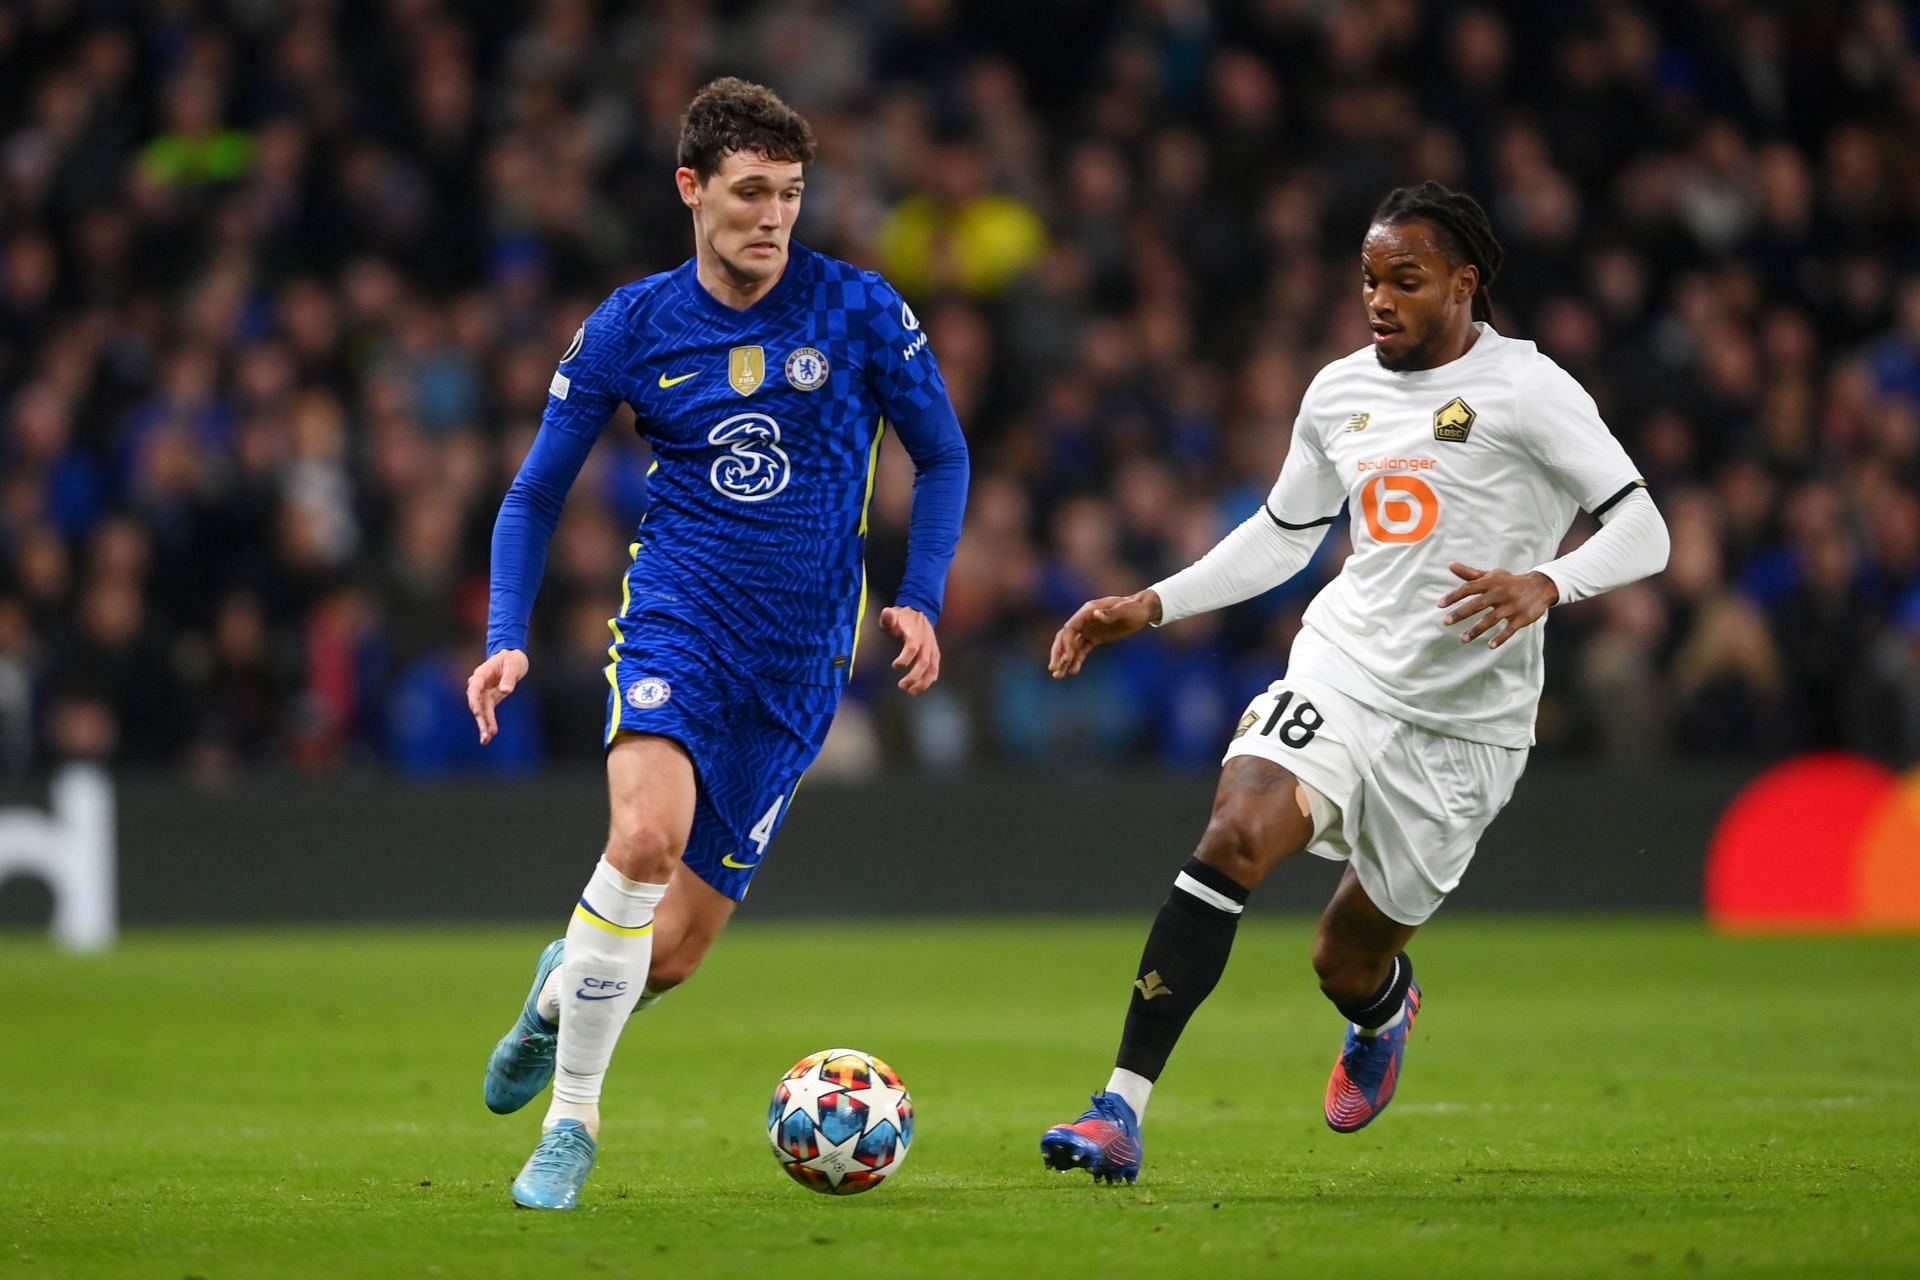 Andreas Christensen is likely to play for Barcelona next season.